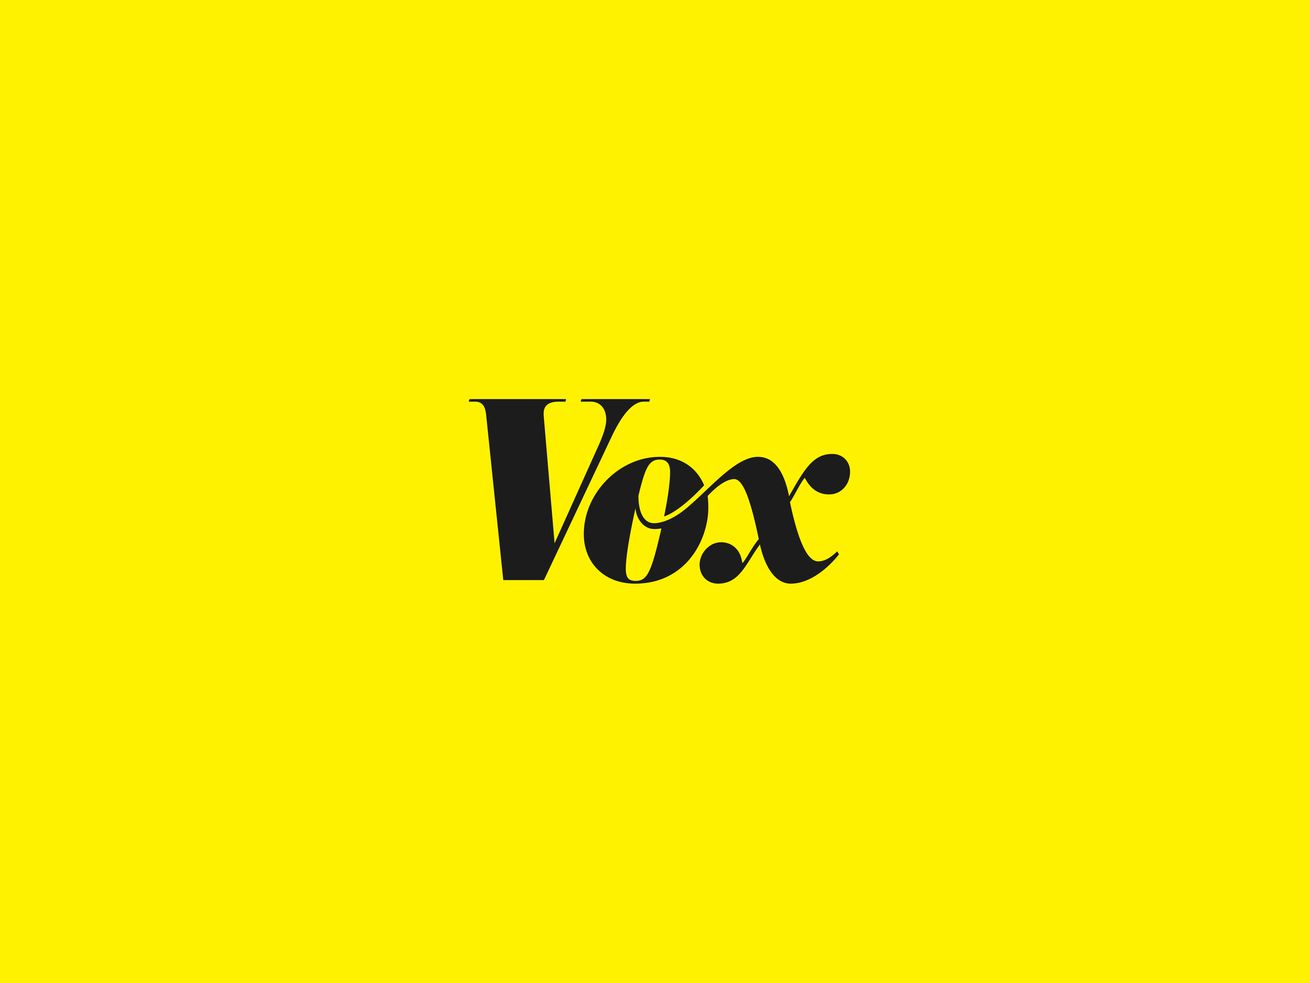 Vox Continues to Expand Its Newsroom With New Hires and Promotions